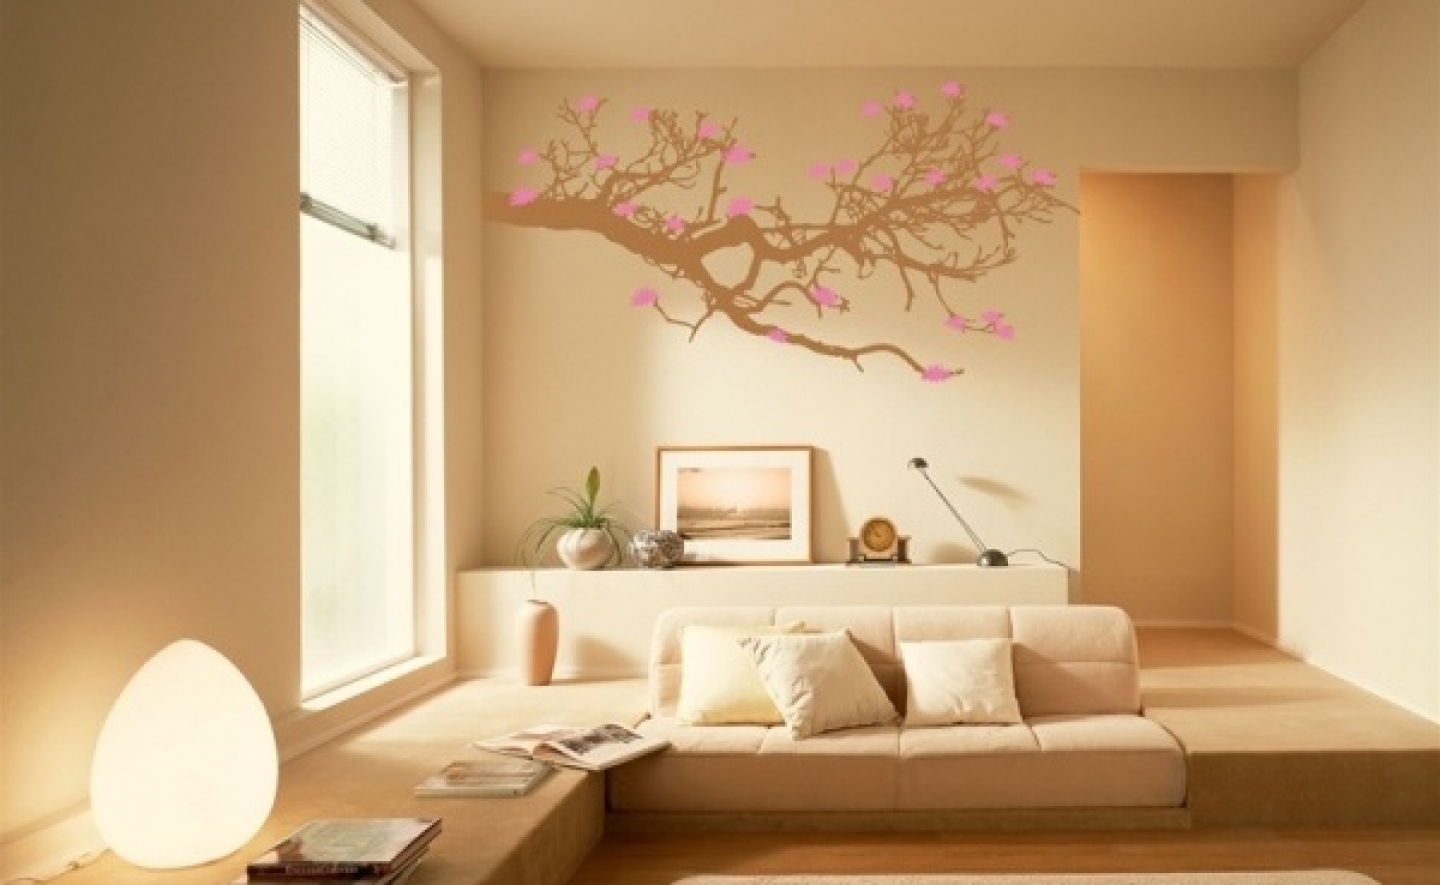 backgrounds wall painted design a wall with pictures design for wall 1440x885